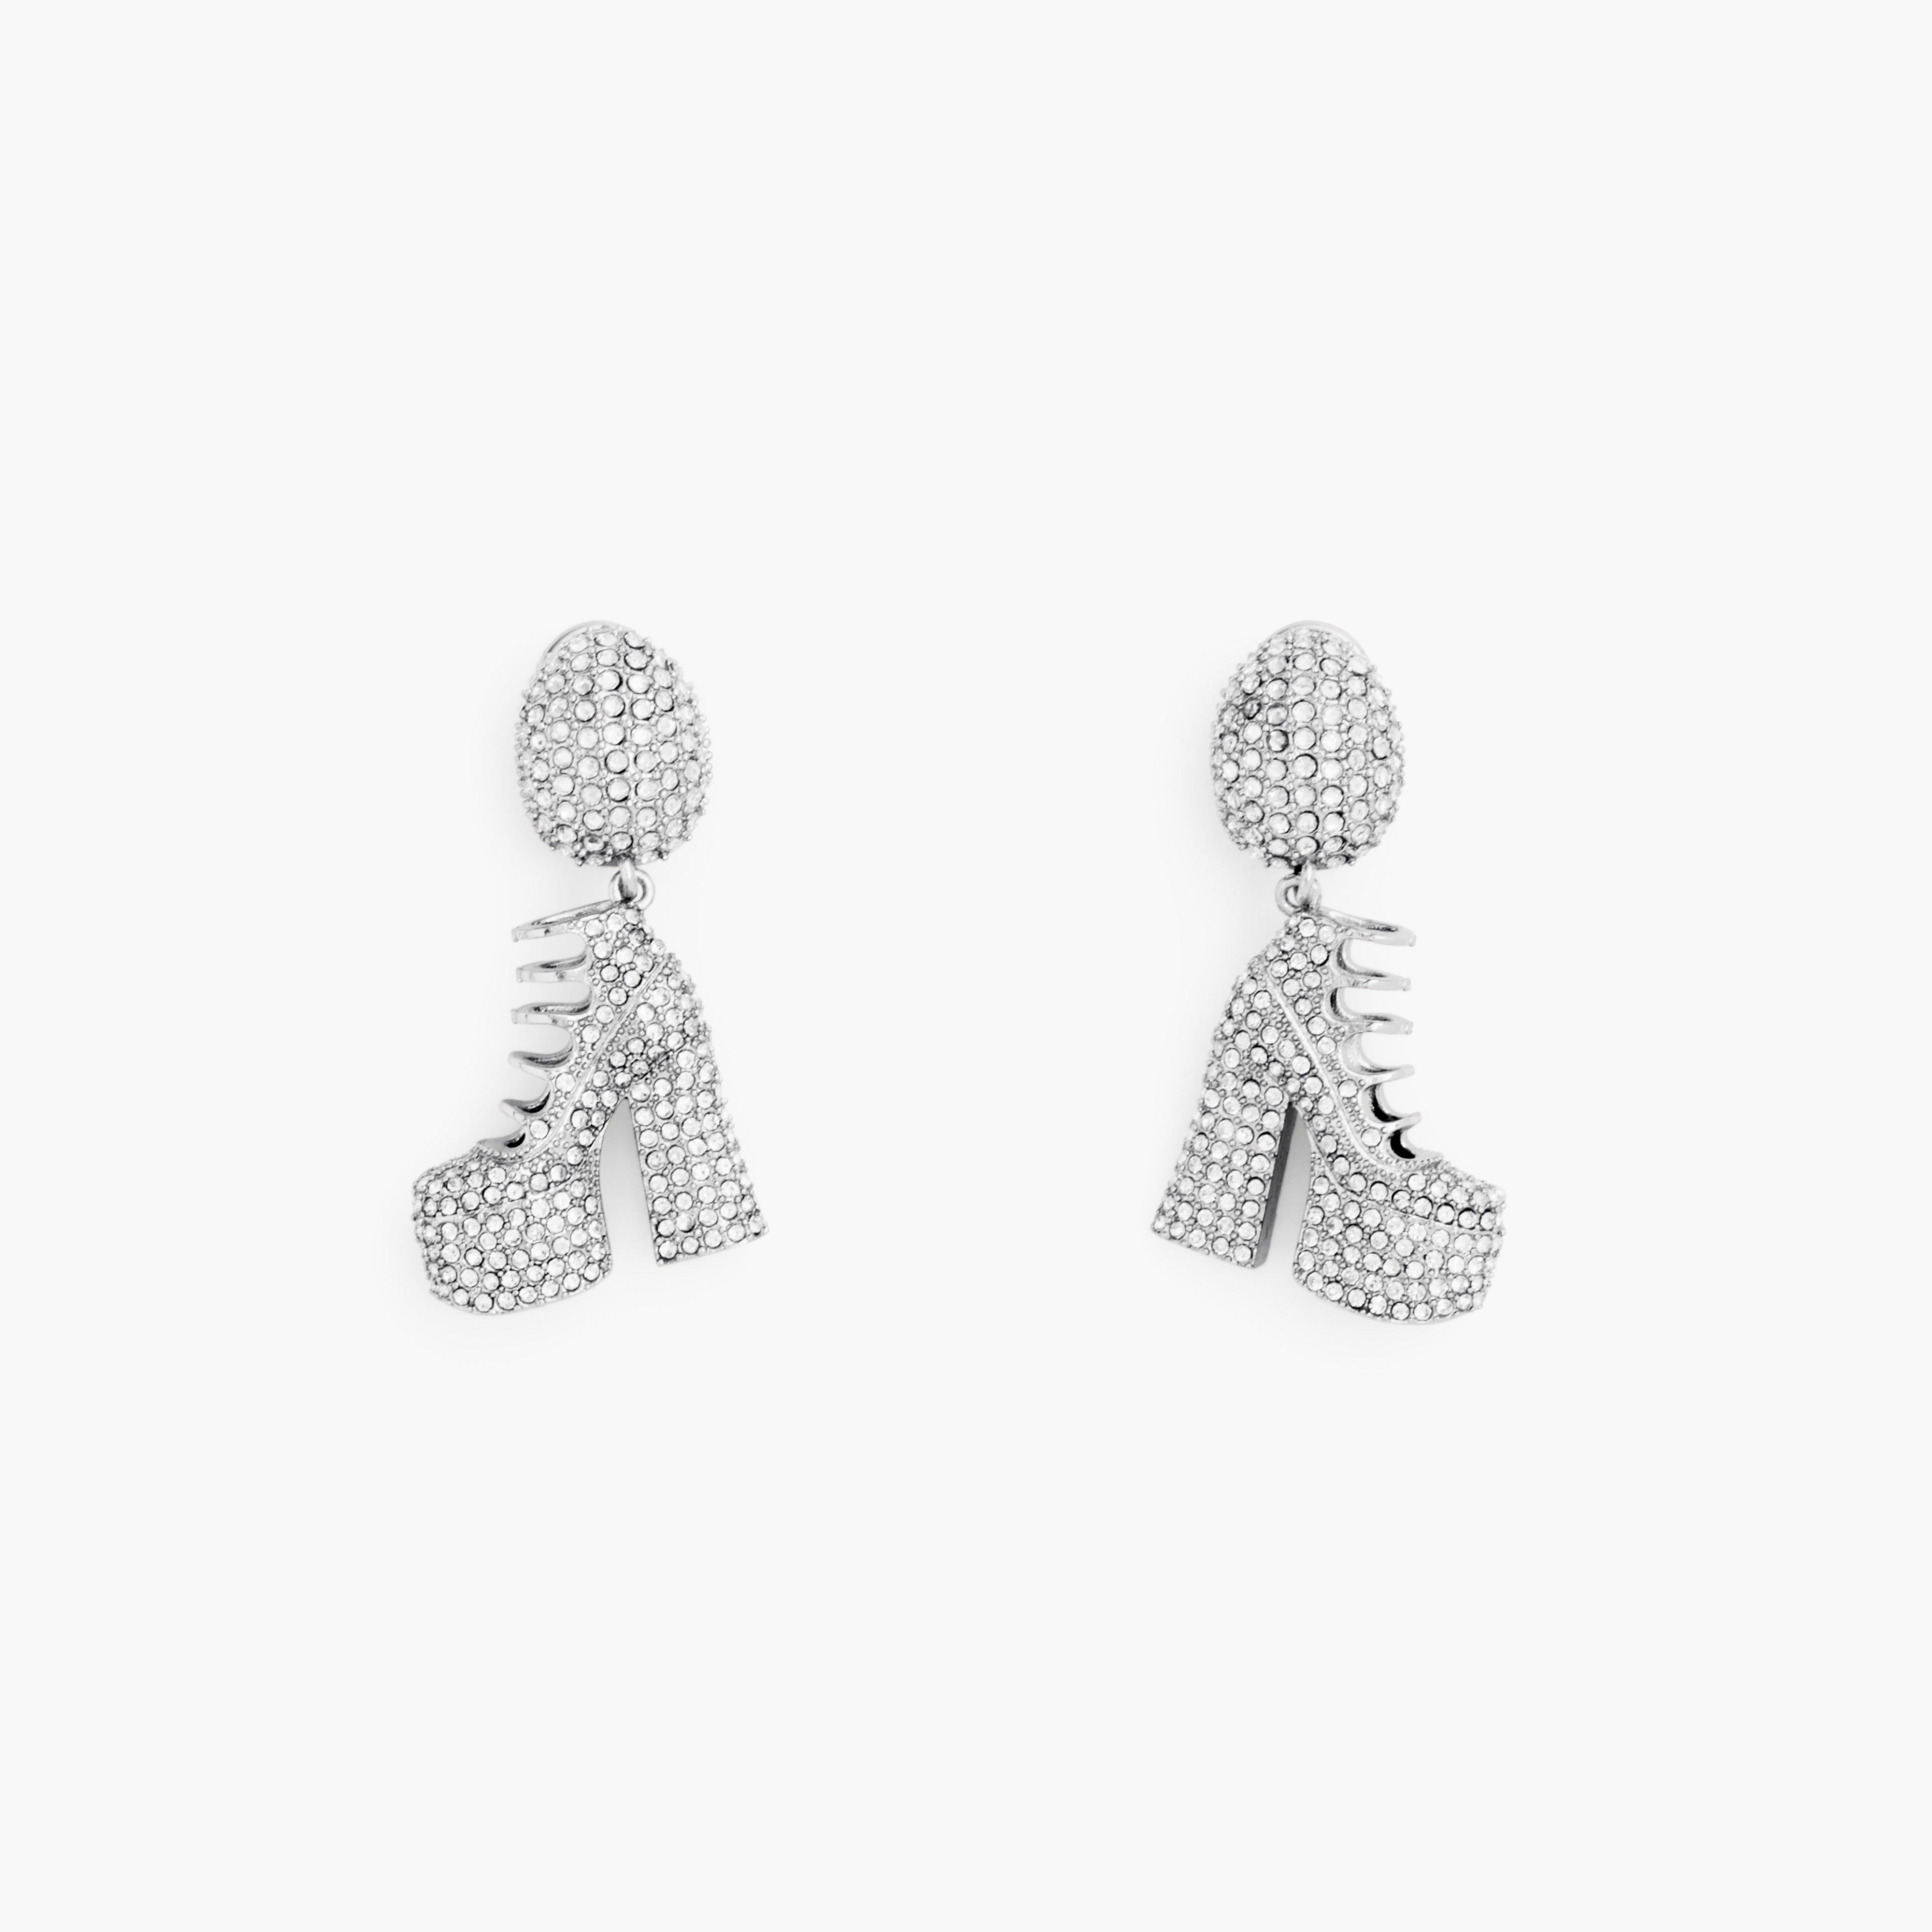 Marc by Marc jacobs The Pave Kiki Ankle Boot Earrings,SILVER/CRYSTAL